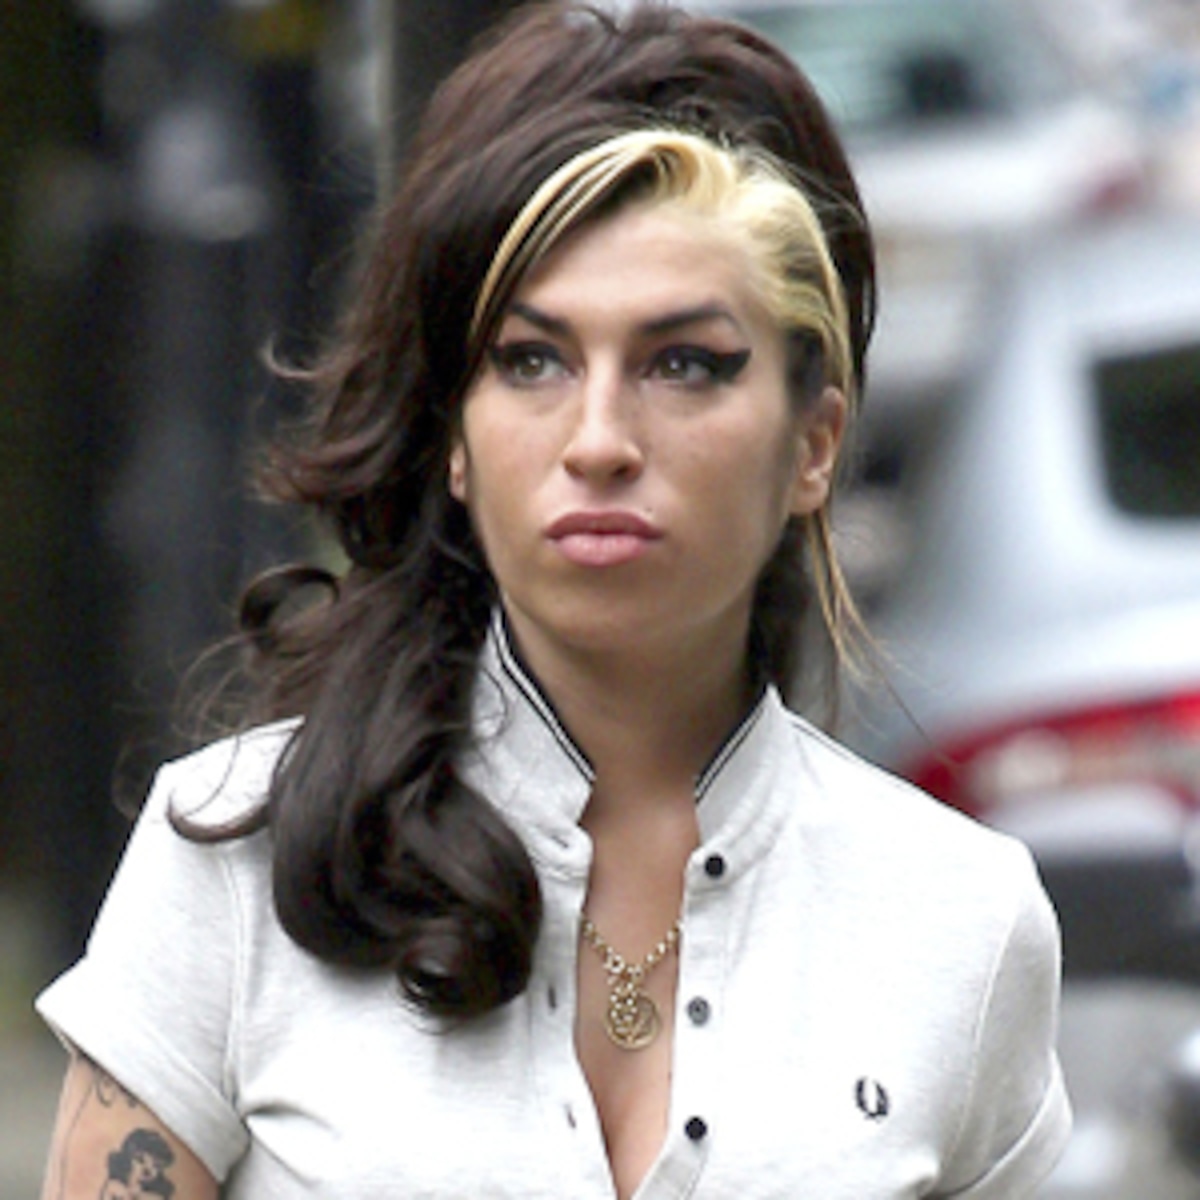 Amy Winehouse S Cause Of Death Accidental Alcohol Poisoning Blood Level Five Times The Legal Limit E Online